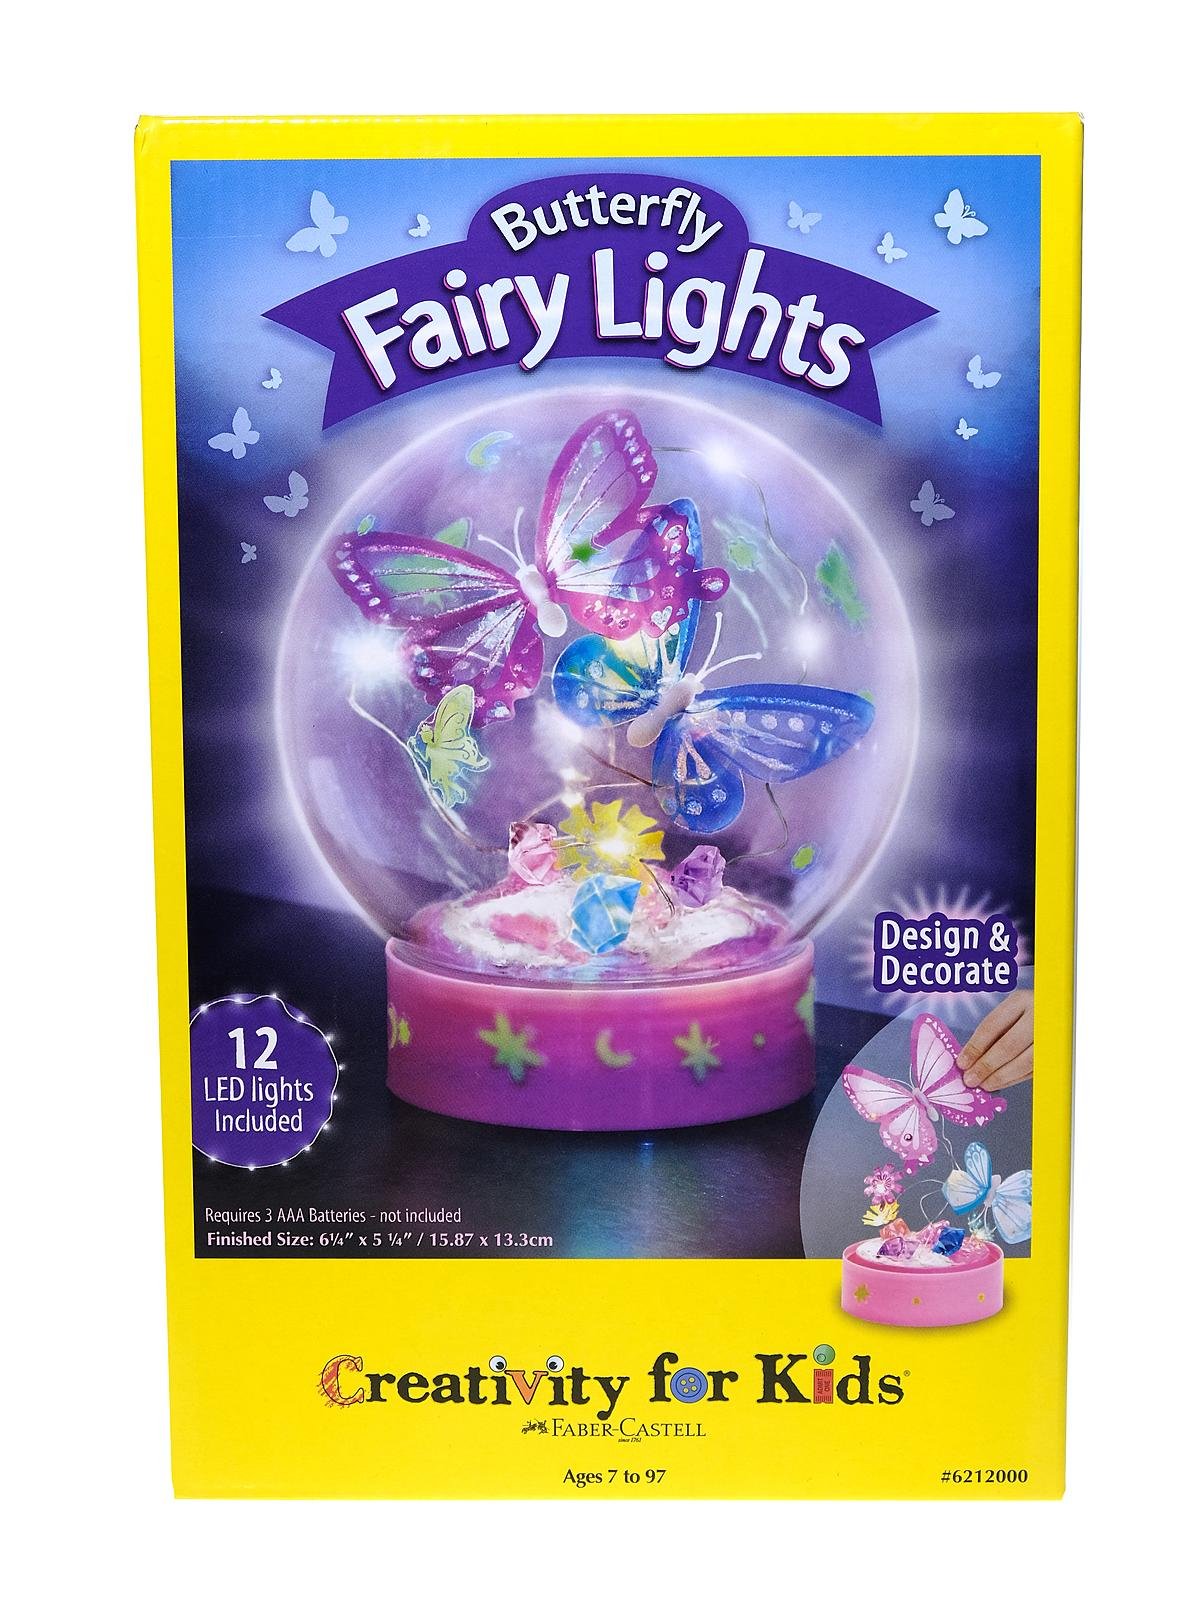 Creativity For Kids - Butterfly Fairy Lights